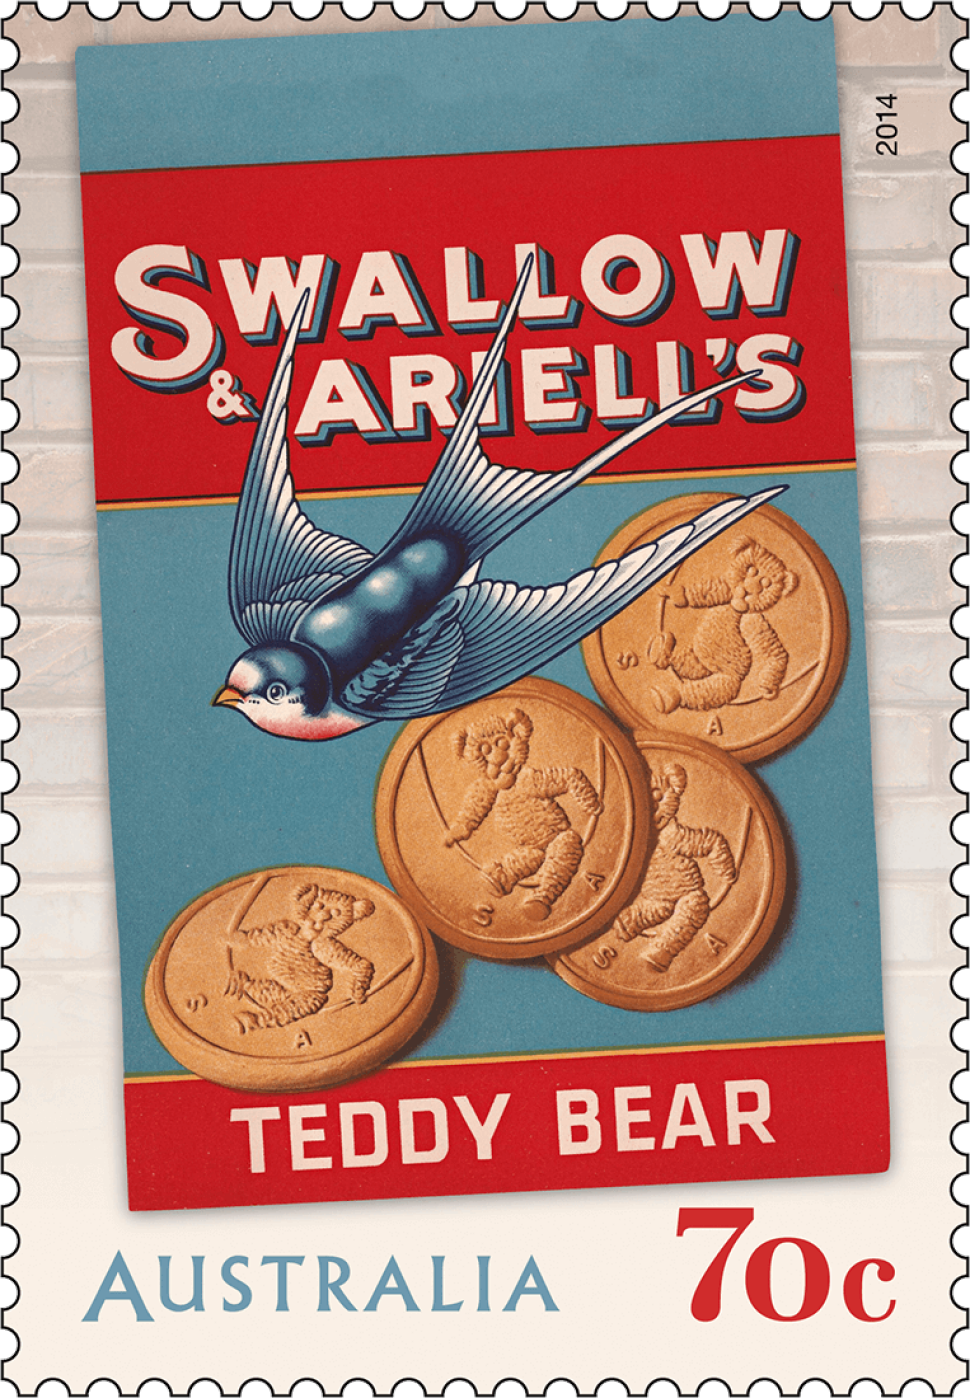 70c Swallow & Ariell’s Teddy Bear stamp